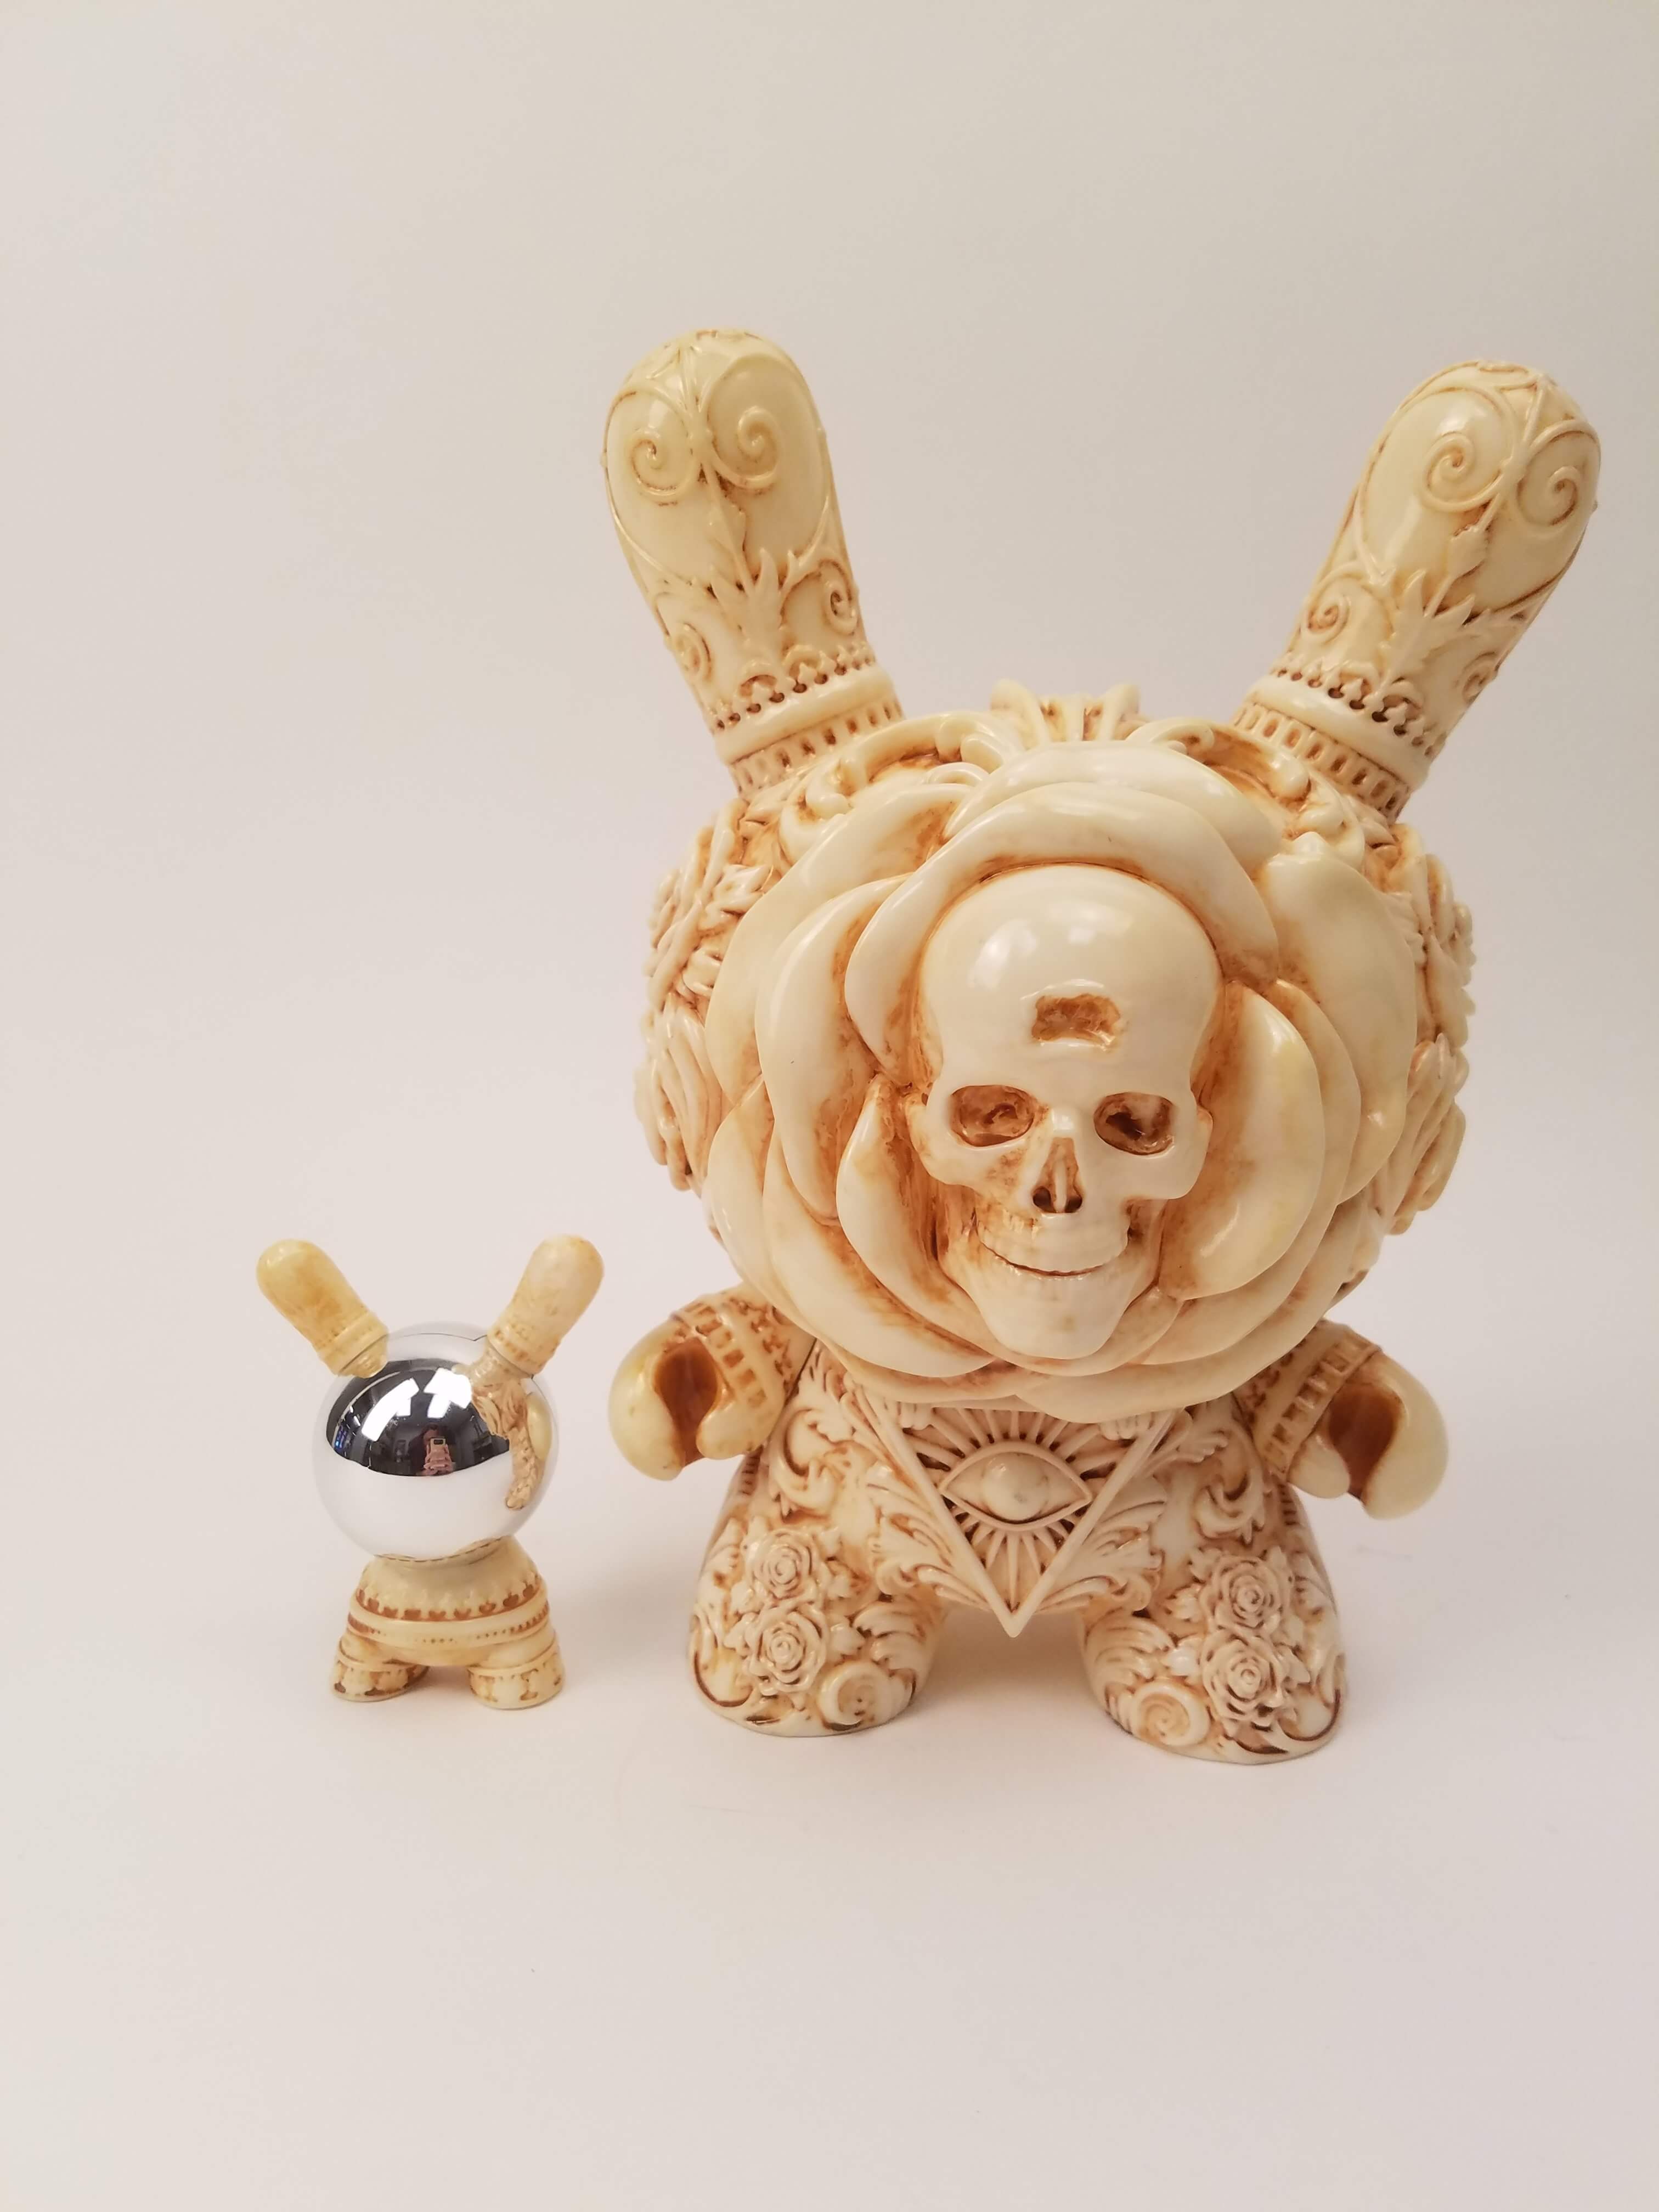 jryu-clairvoyant-dunny-1